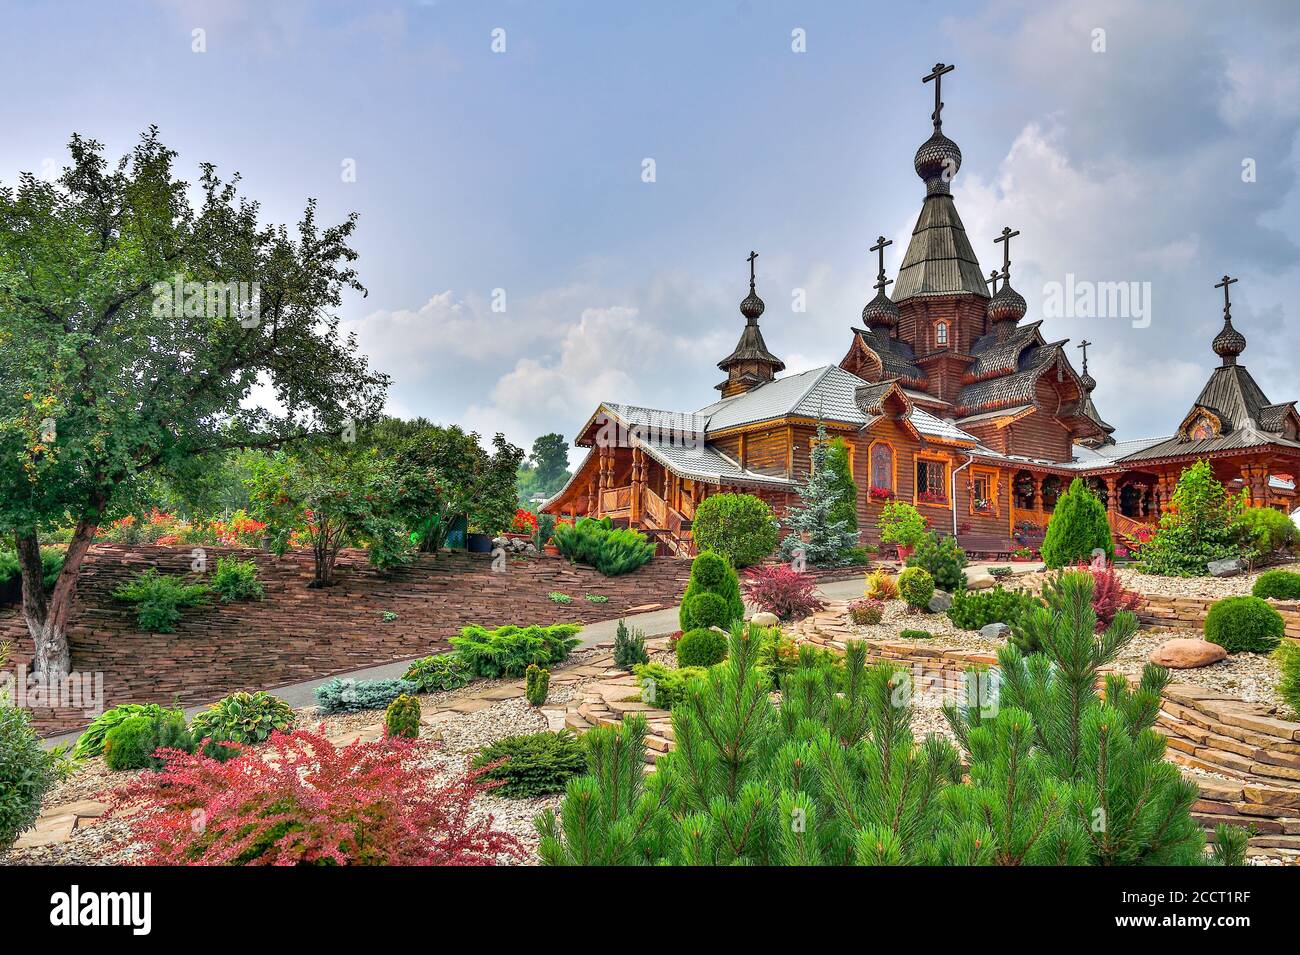 Novokuznetsk, Russia - August 15, 2020: Stony garden with dwarf conifers on front yard of Christian Temple of the Holy Martyr John the Warrior. Beauty Stock Photo